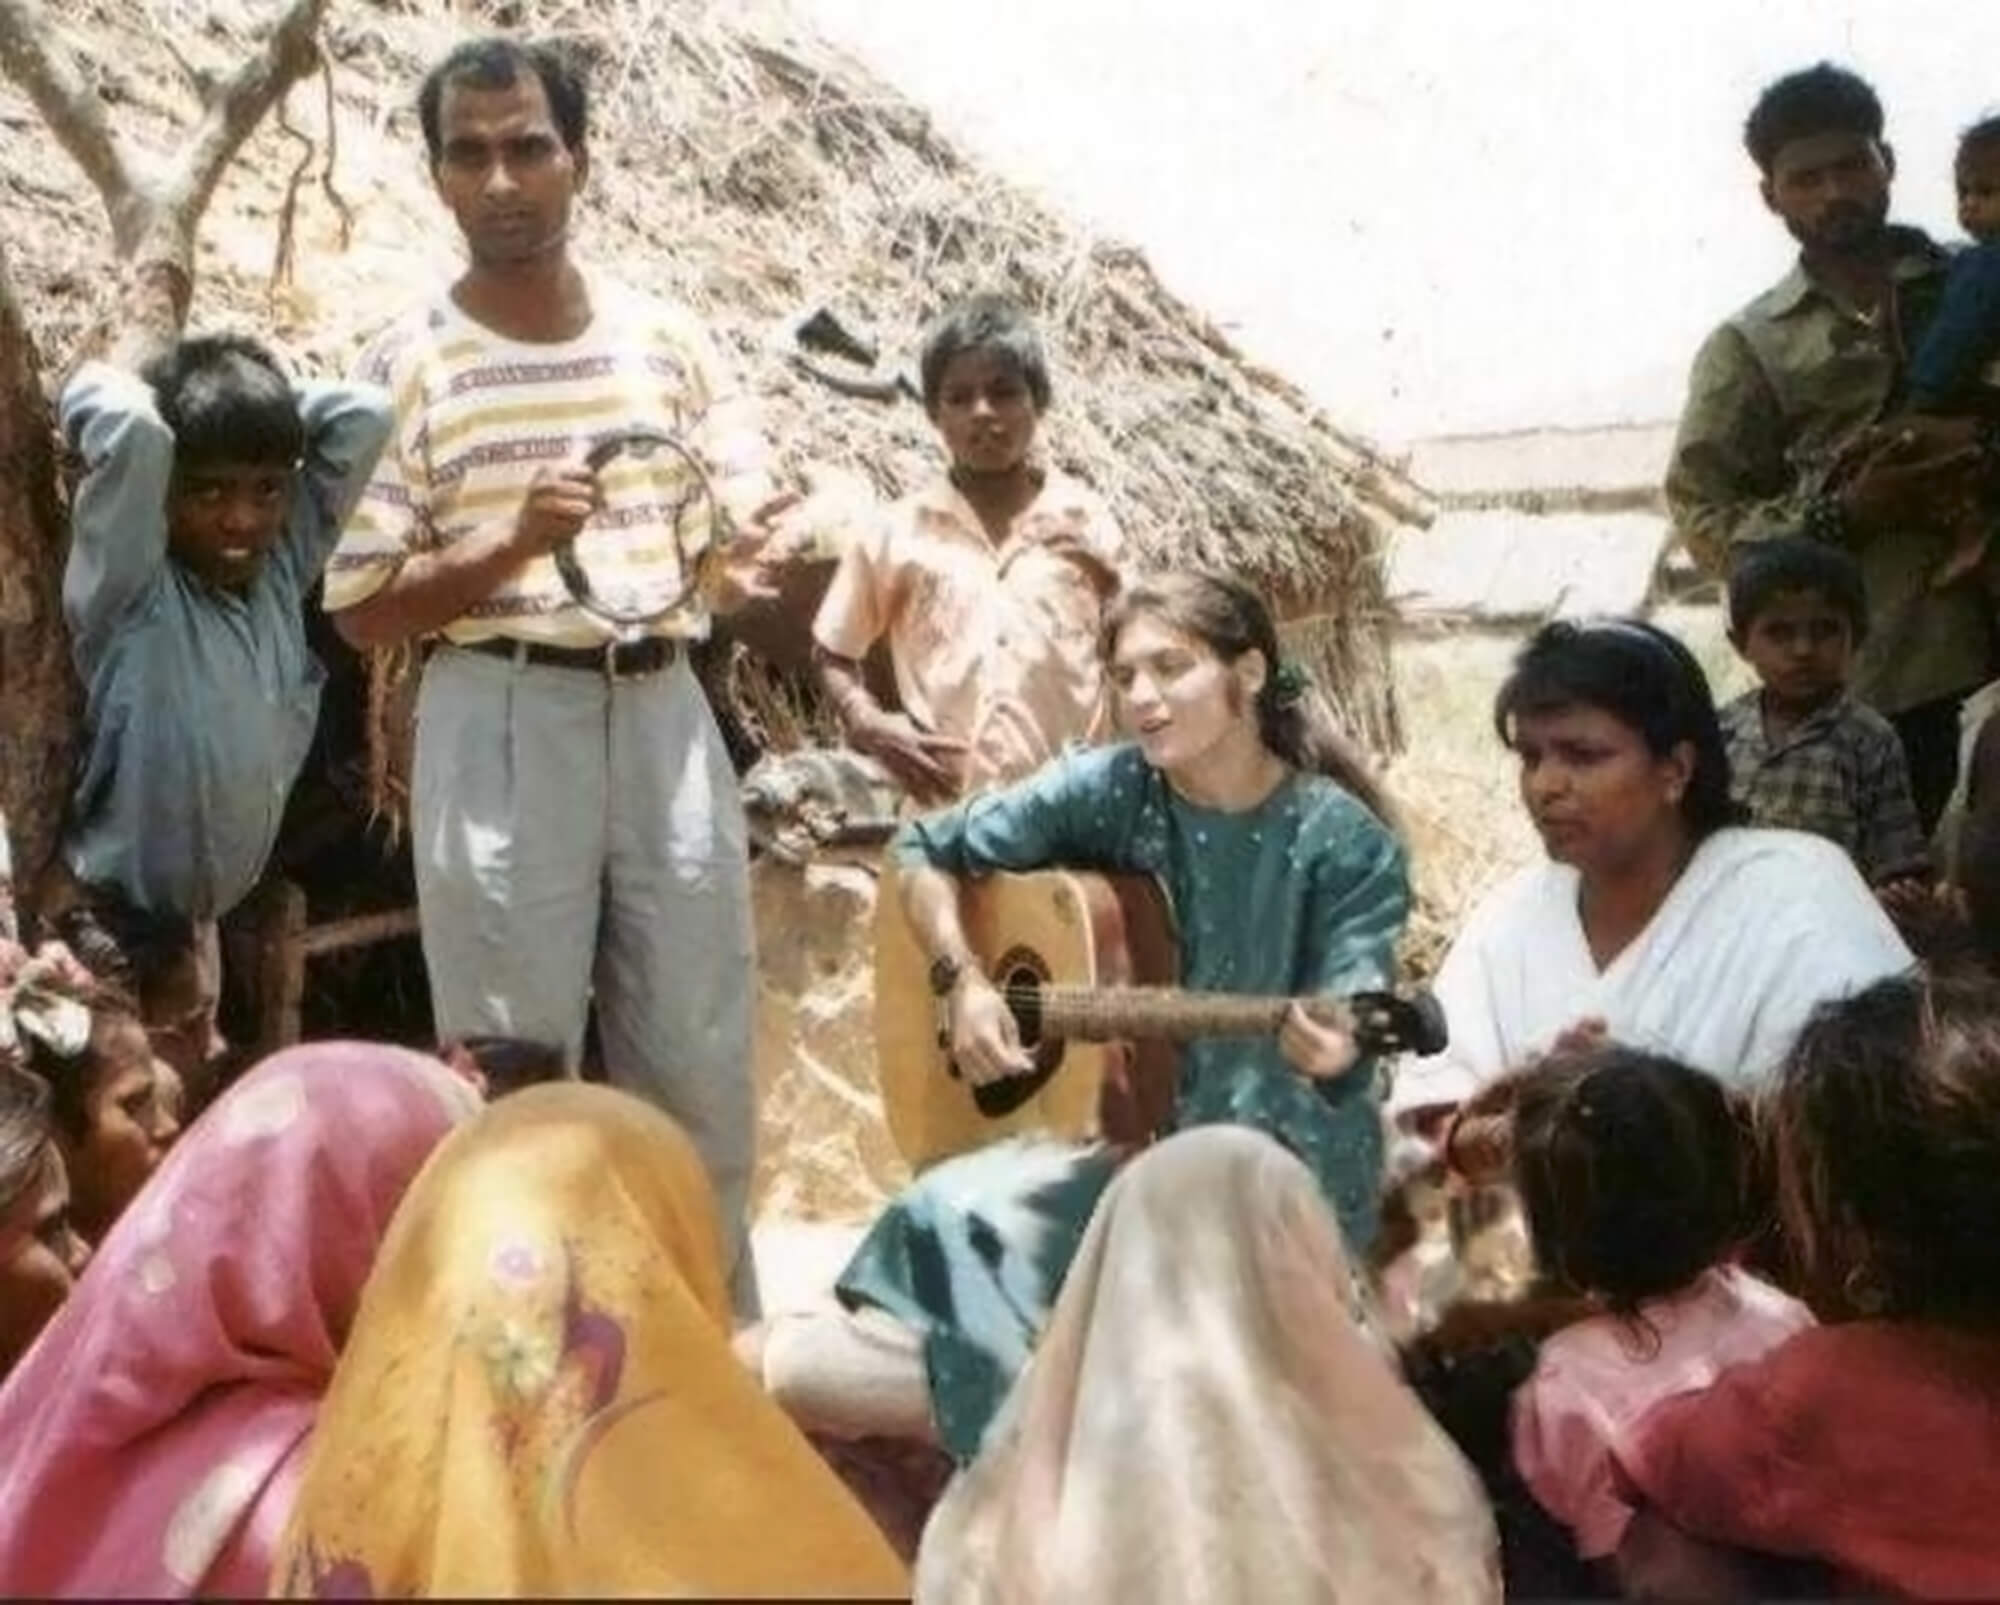 1997 – Leanna with native leaders in an Indian village.